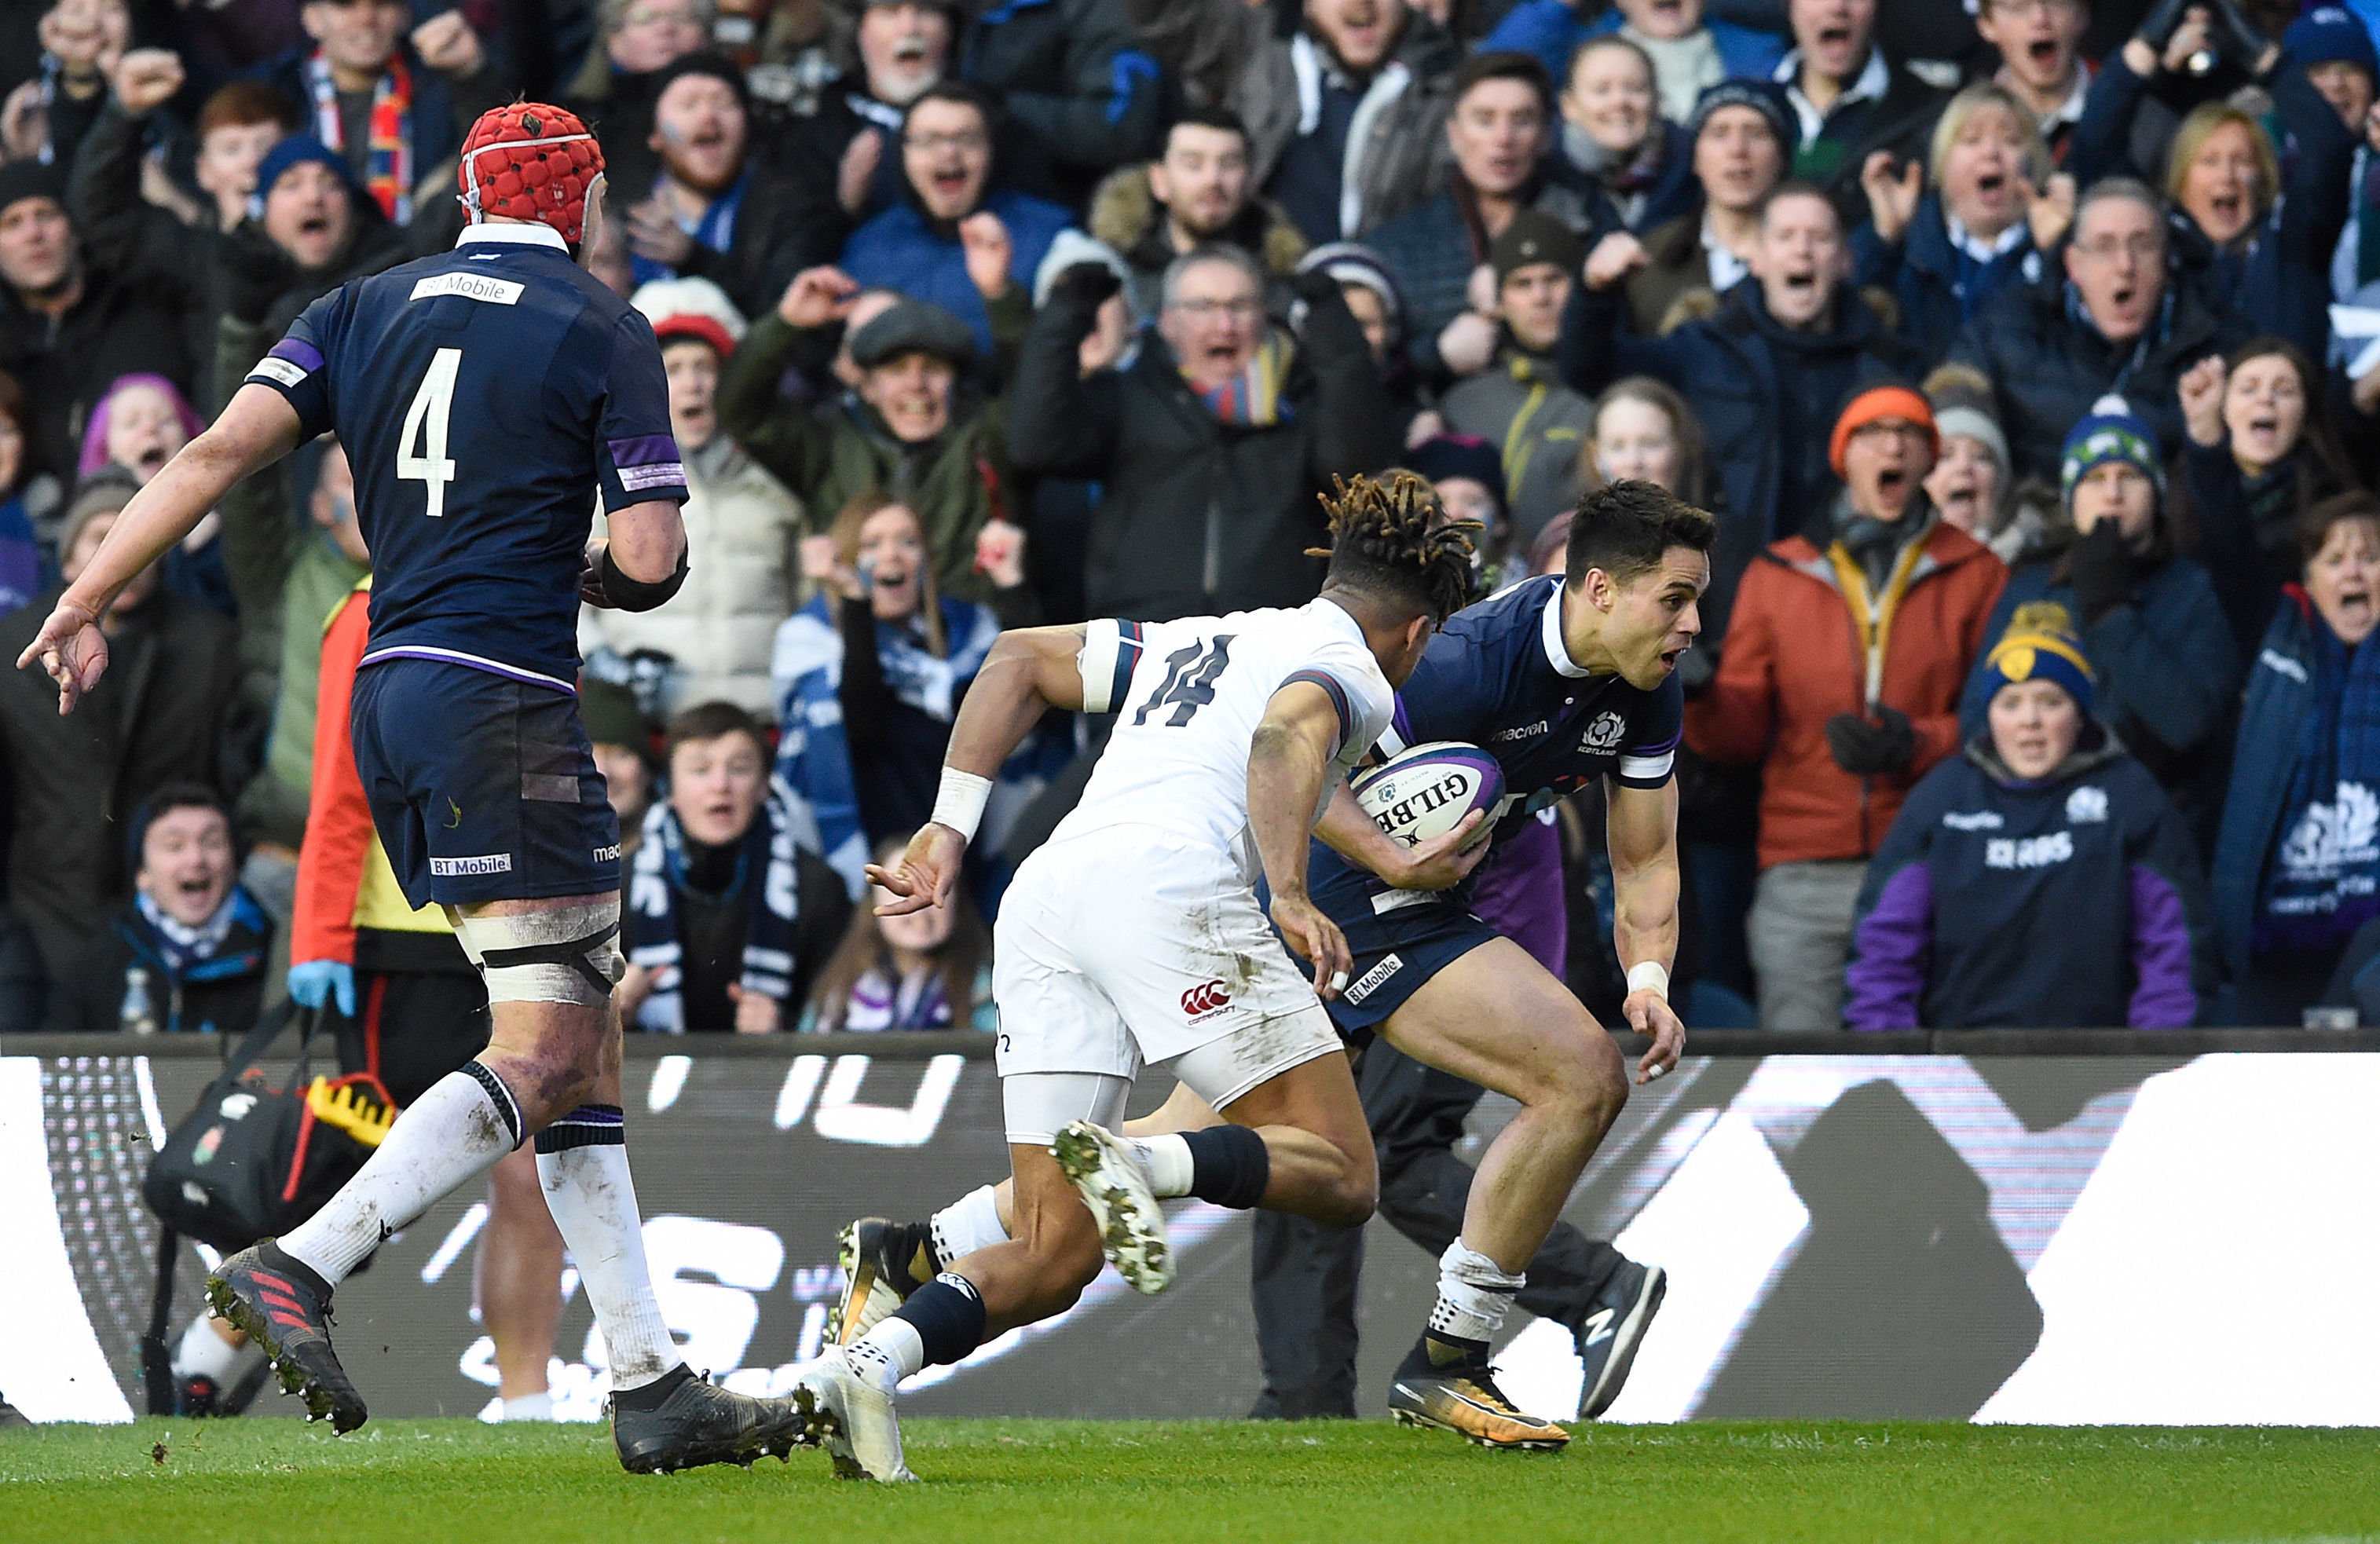 Sean Maitland scores Scotland's second try, launched by The Pass from Finn Russell to Huw Jones.